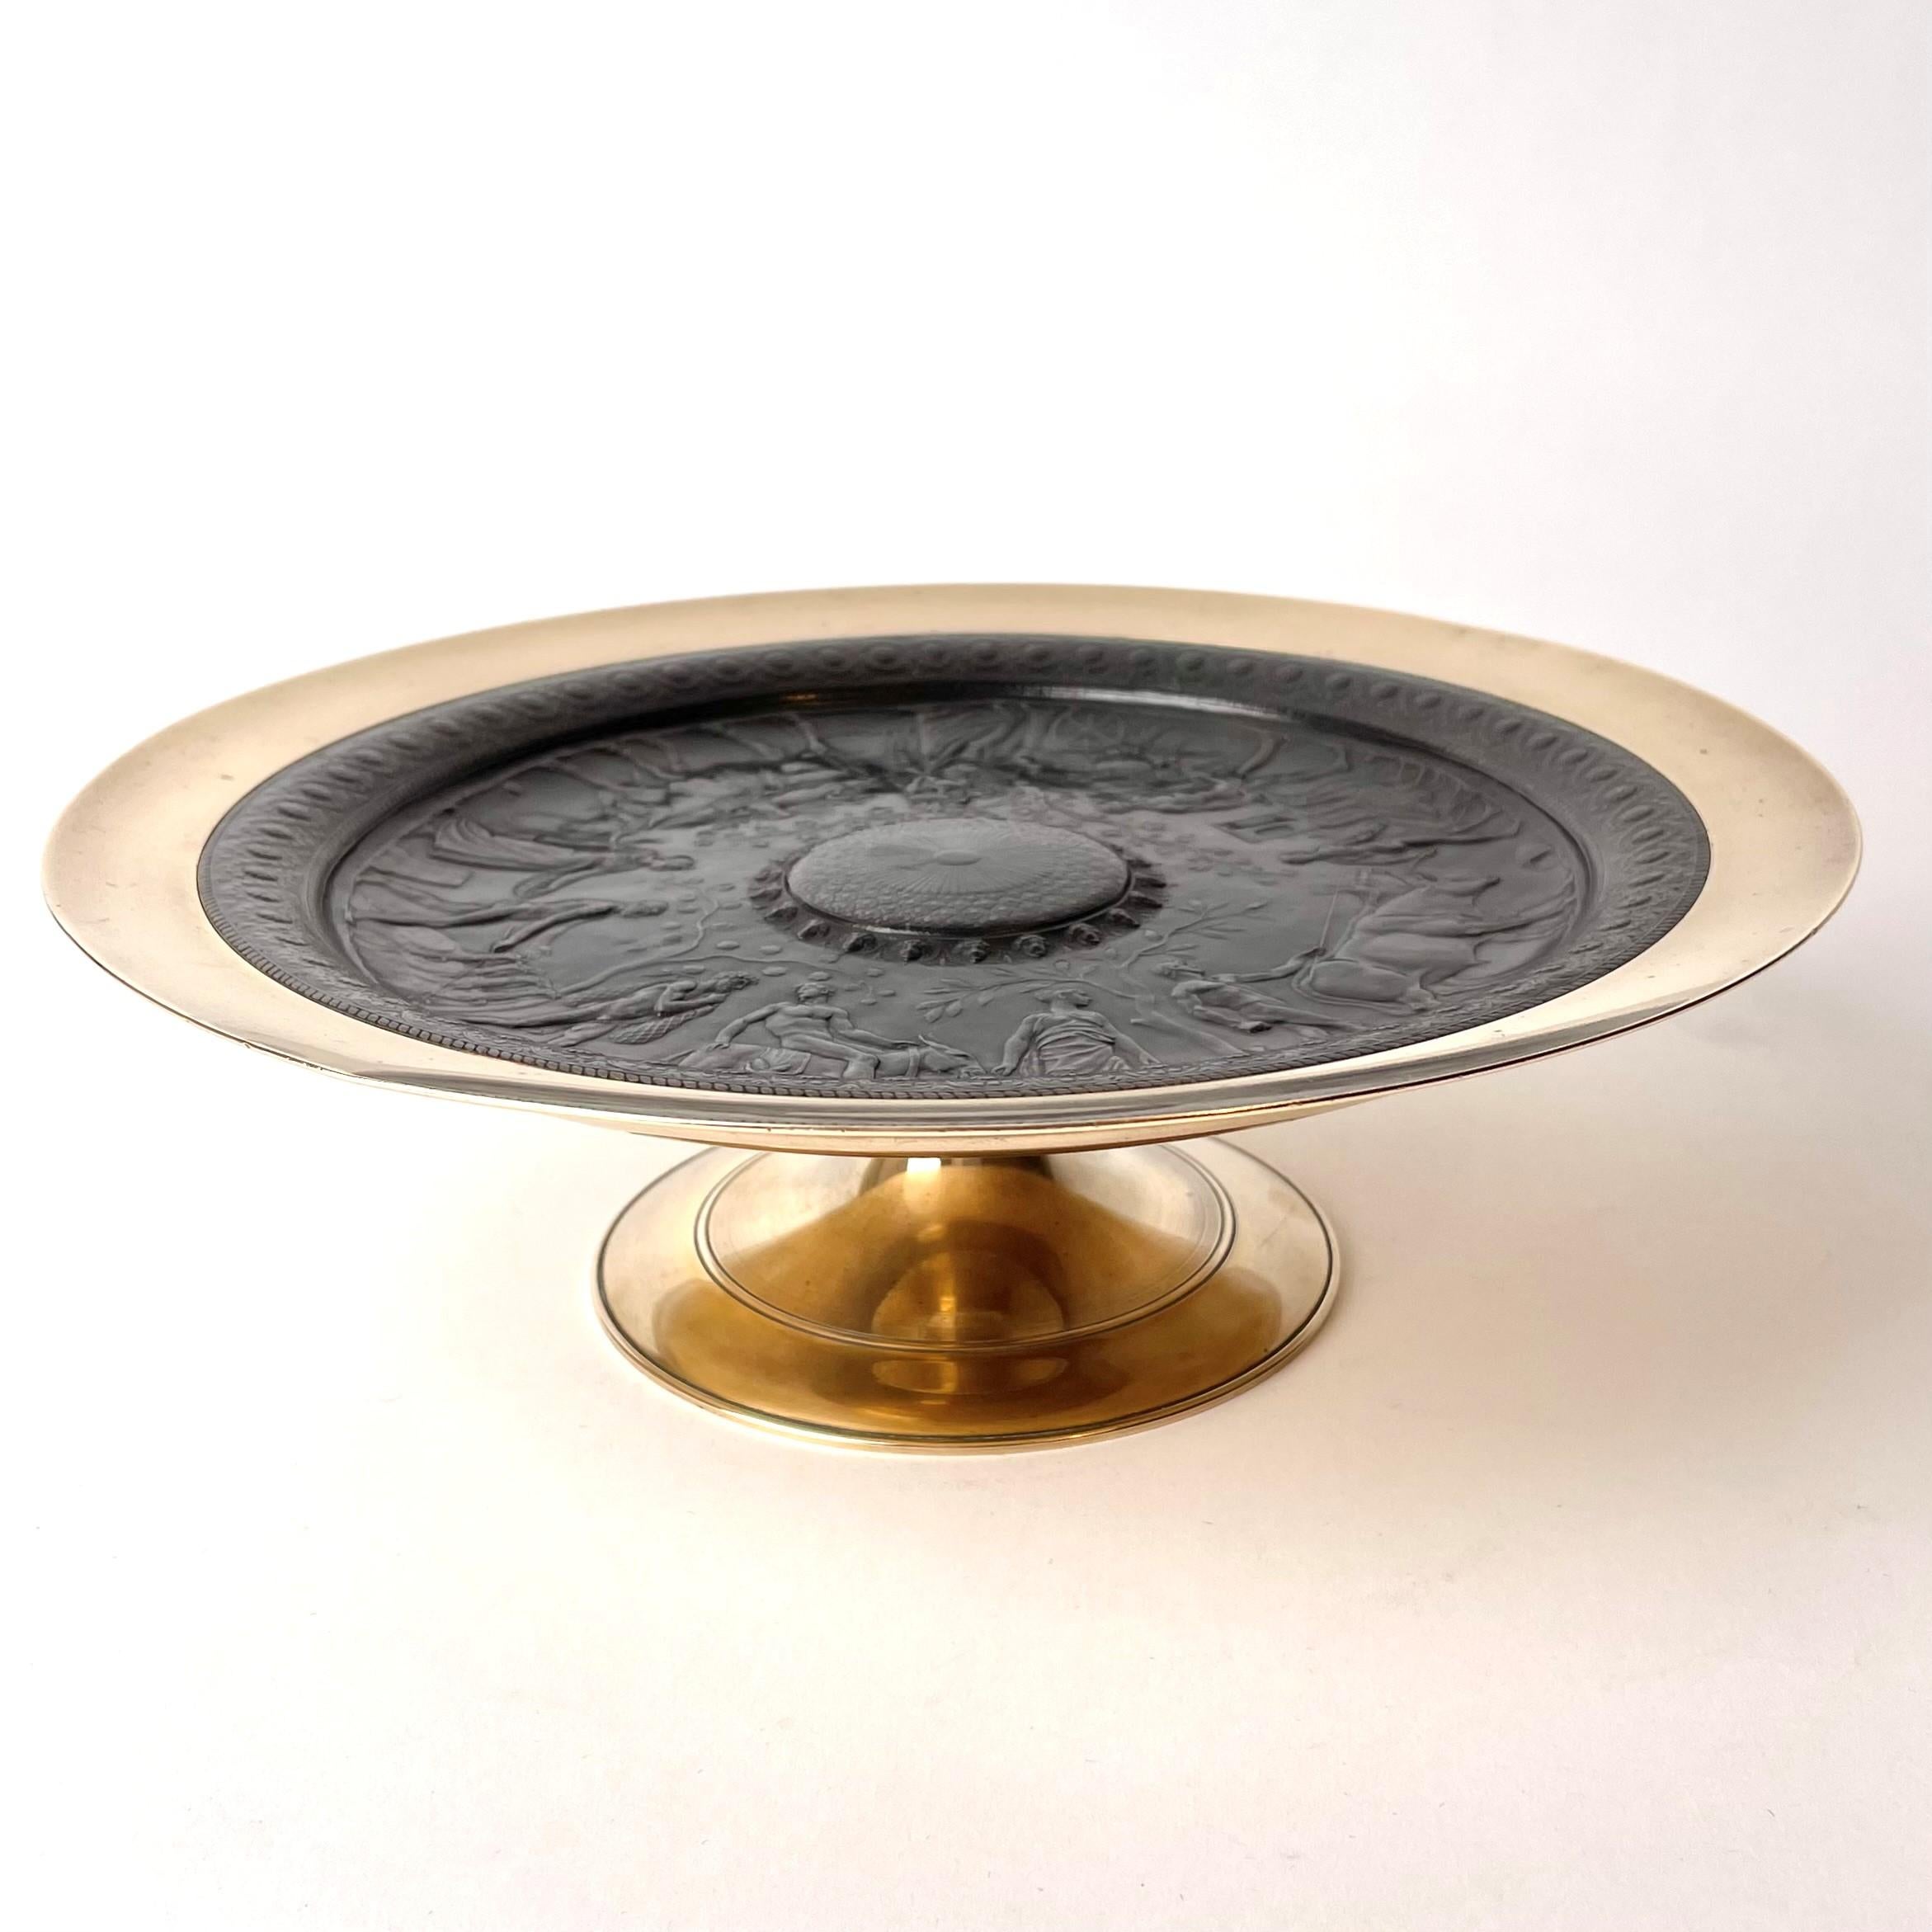 A beautiful Neo-Grec Tazza in bronze and patinated bronze, signed by the artist Ferdinand Levillain ( 1837-1905) and cast by the famous Ferdinand Barbedienne (1810-1892).

France 1860s-1870s

Wear consistent with age and use.